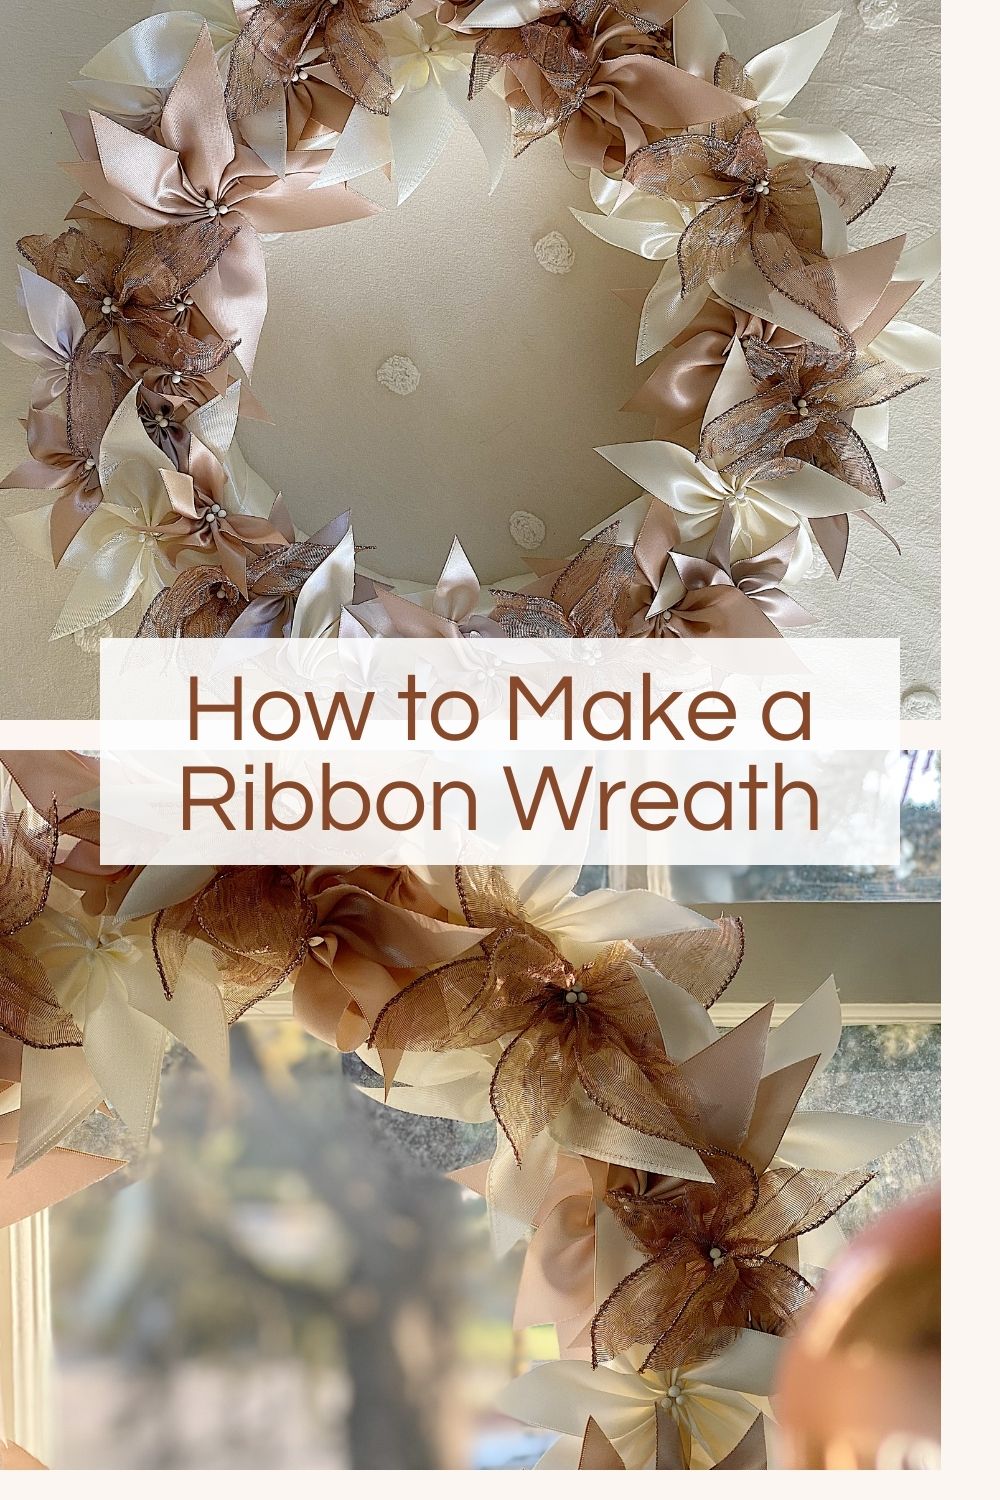 I love my new Christmas wreath and today I am sharing how to make a ribbon wreath. This is a pretty yet easy DIY holiday craft.